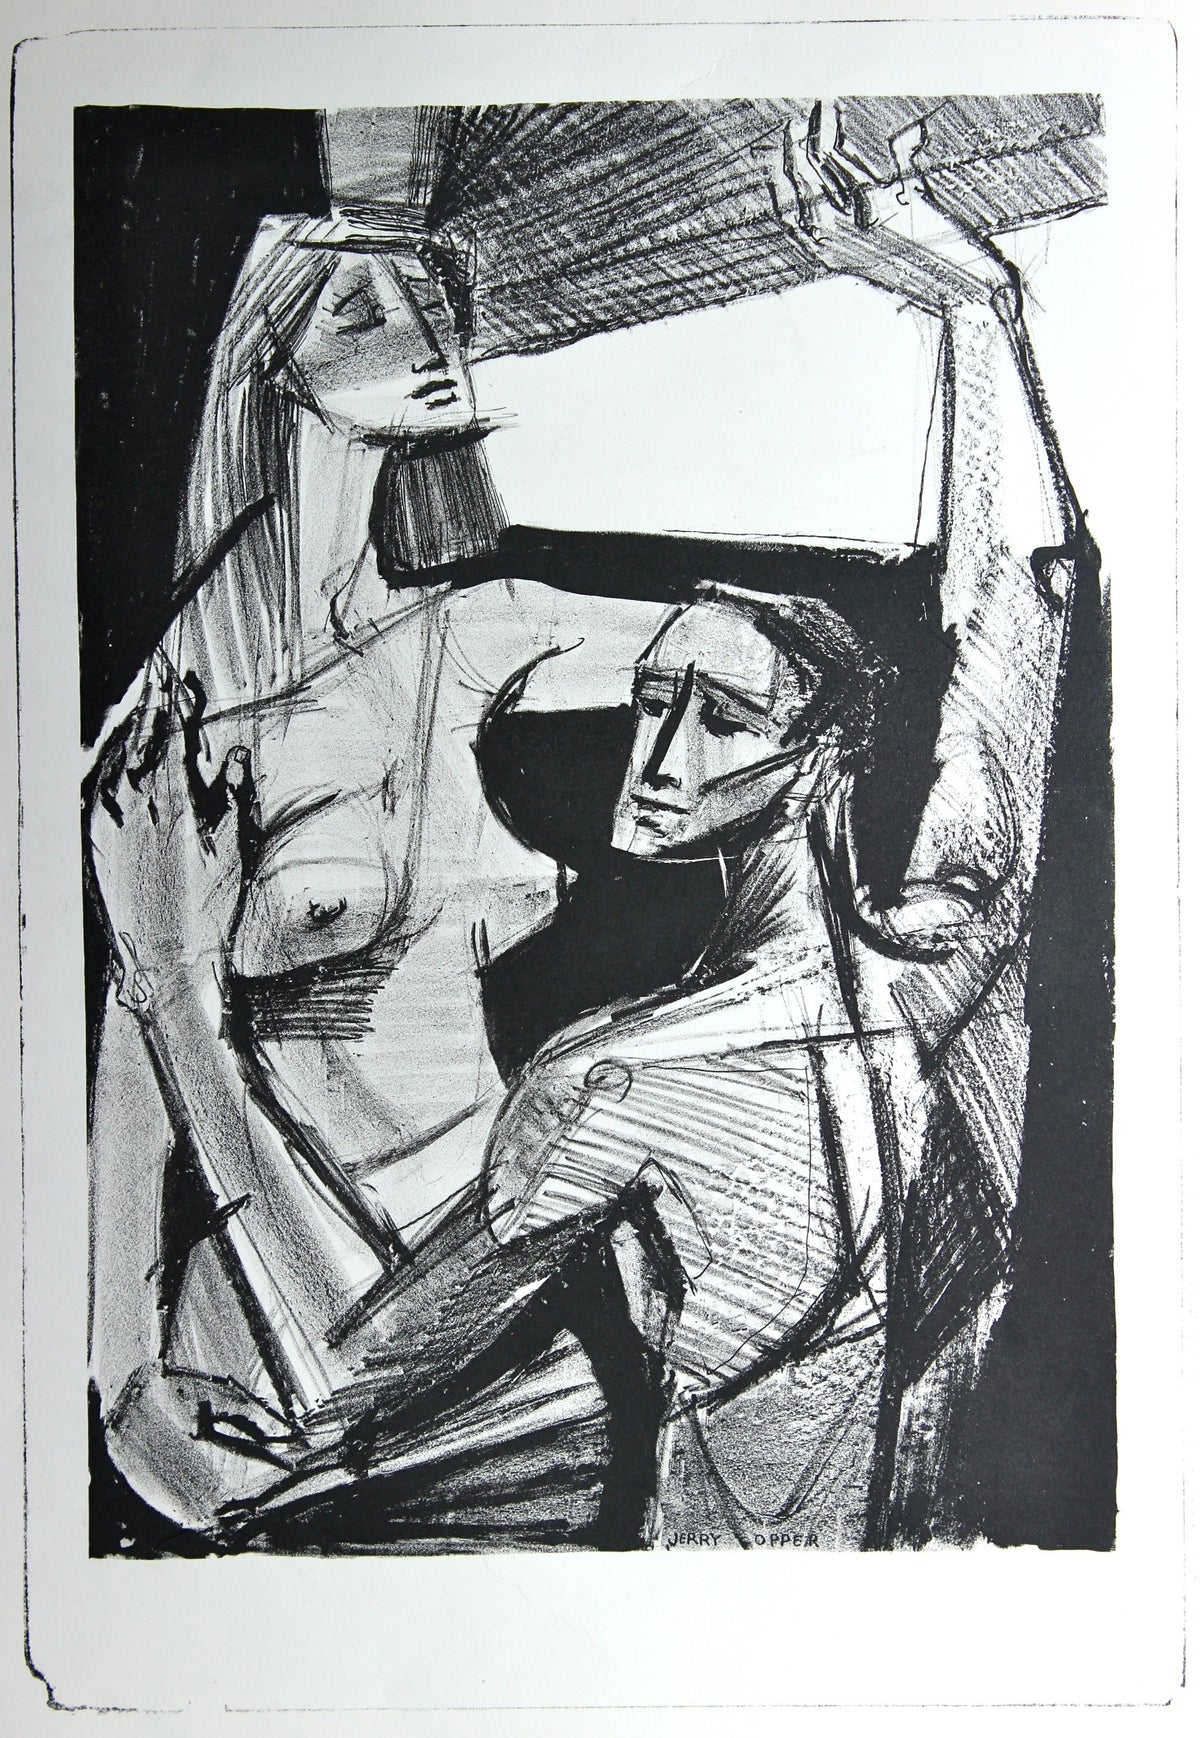 Nude Couple by a Window&lt;br&gt;1940-50s Stone Lithograph&lt;br&gt;&lt;br&gt;#38926